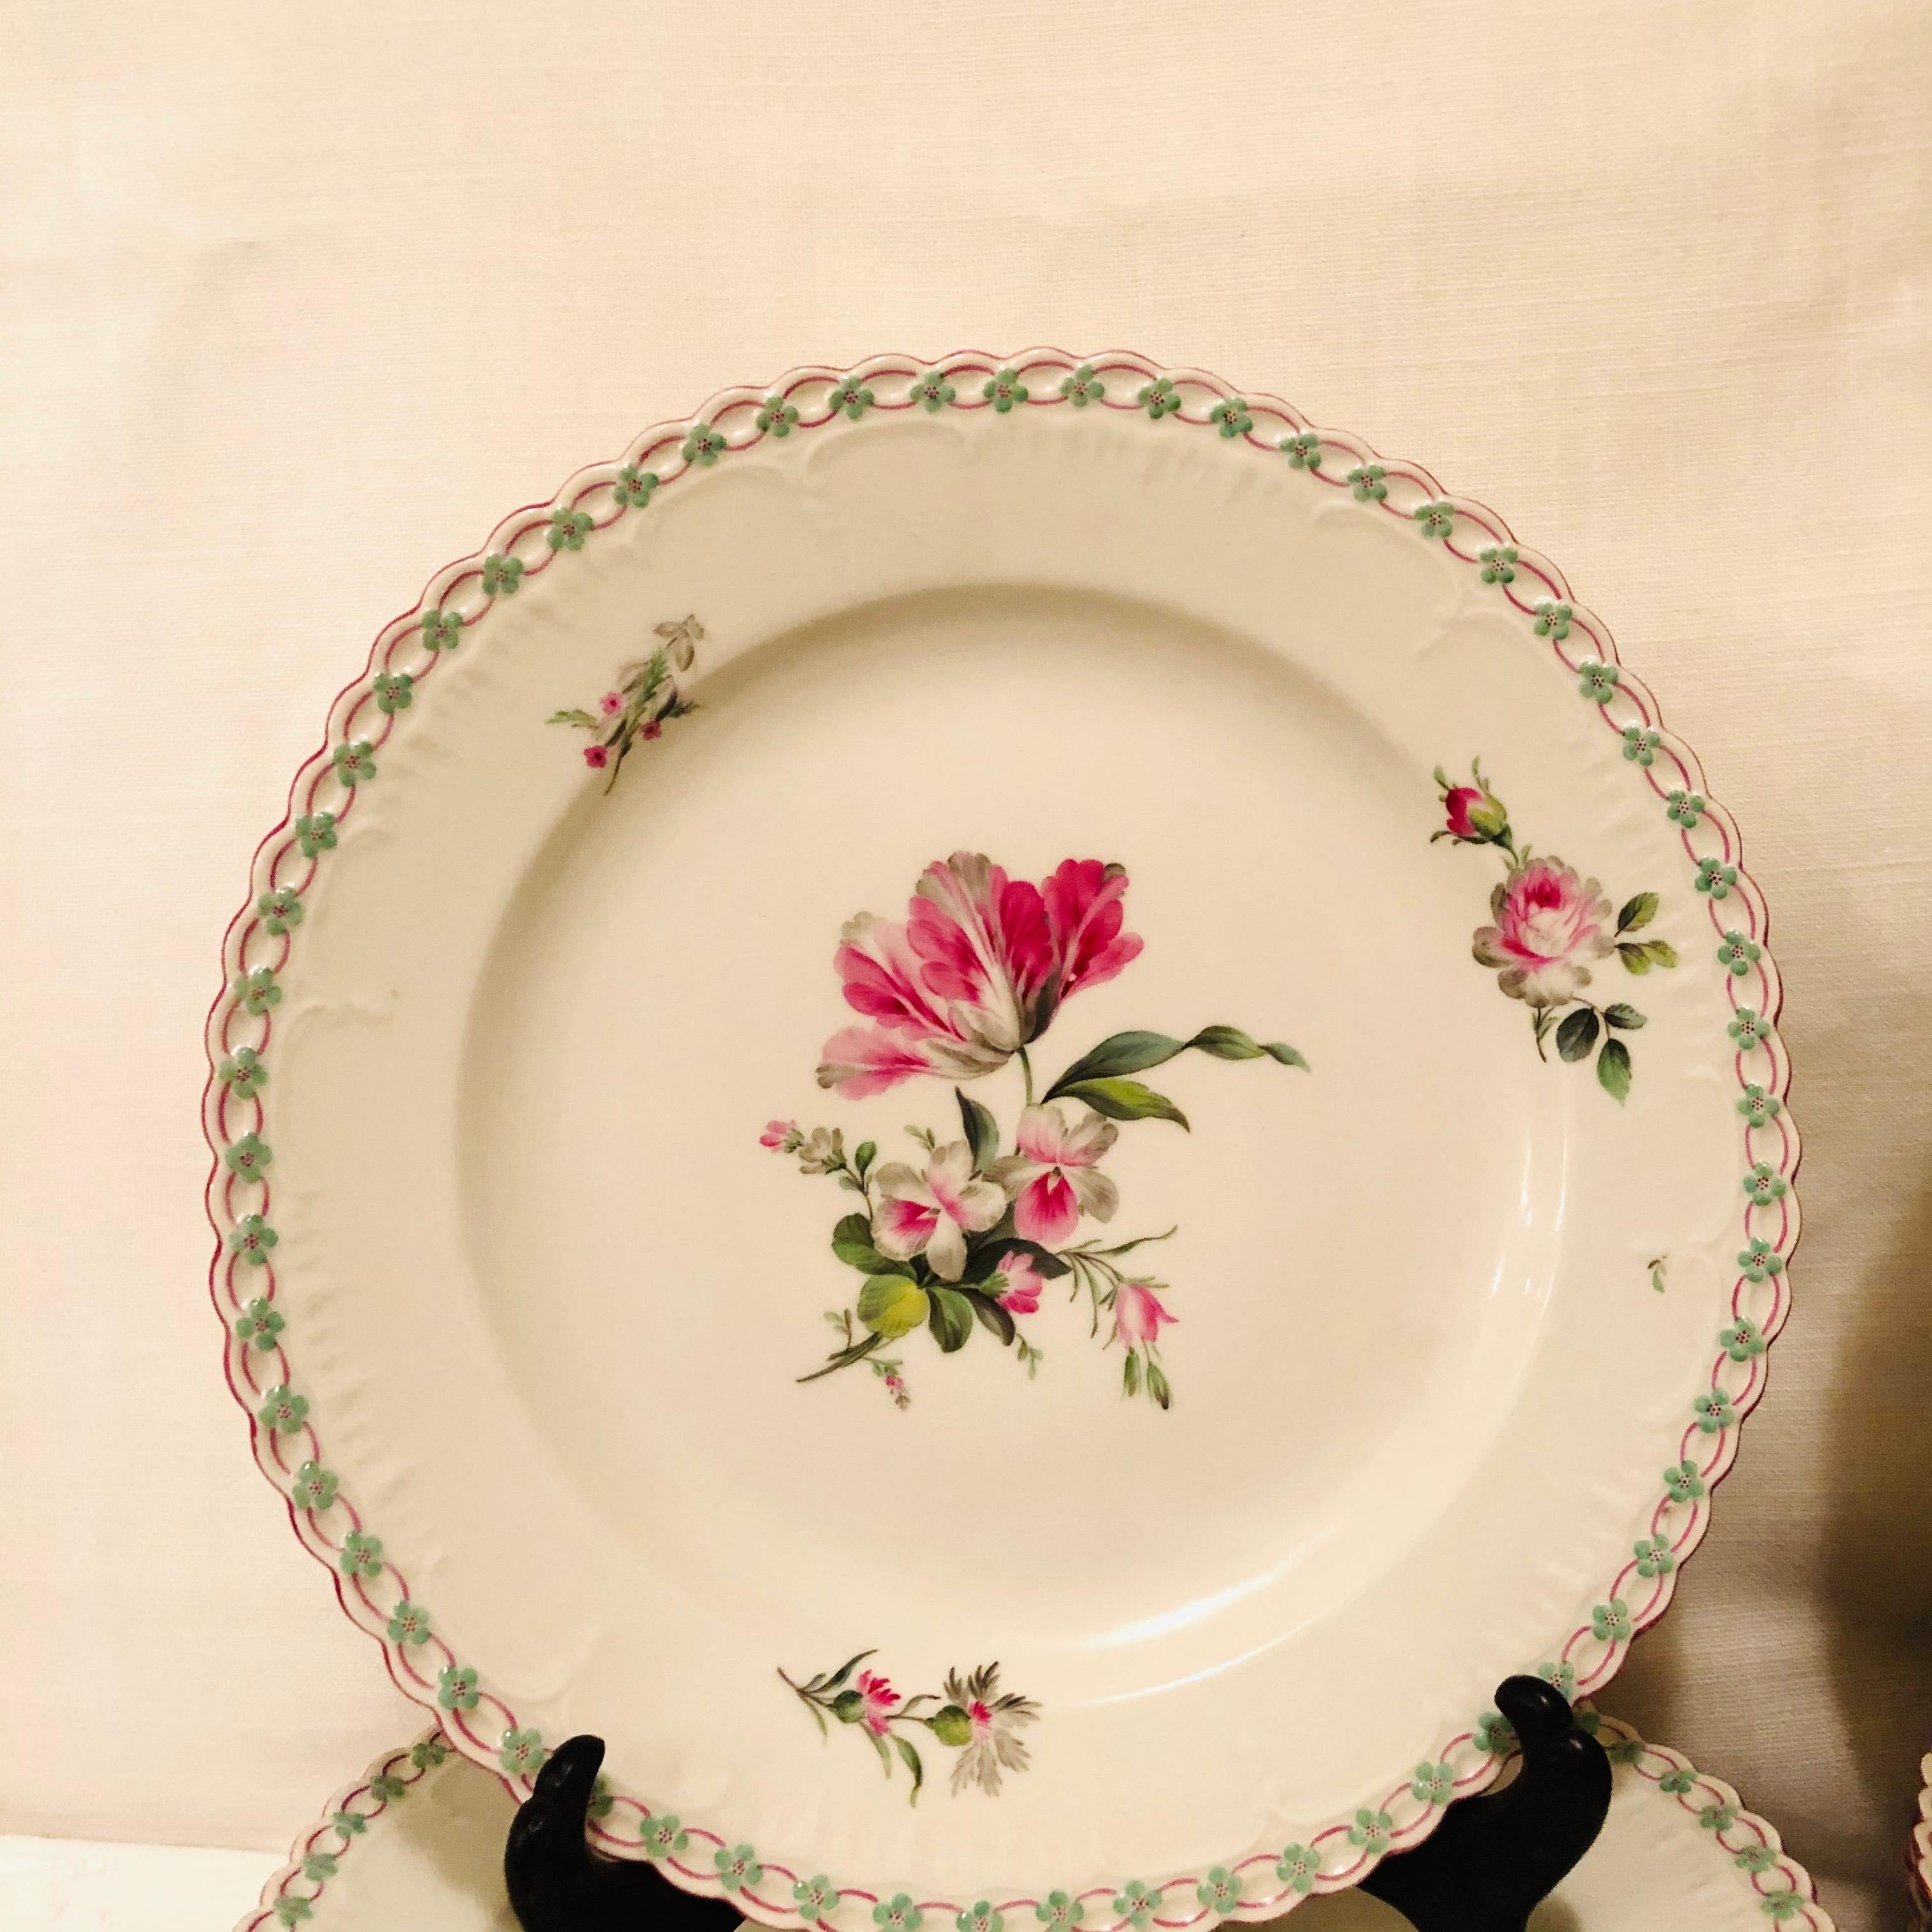 Romantic Set of 13 KPM Dinner Plates Each Painted Differently With Raised Forget Me Nots